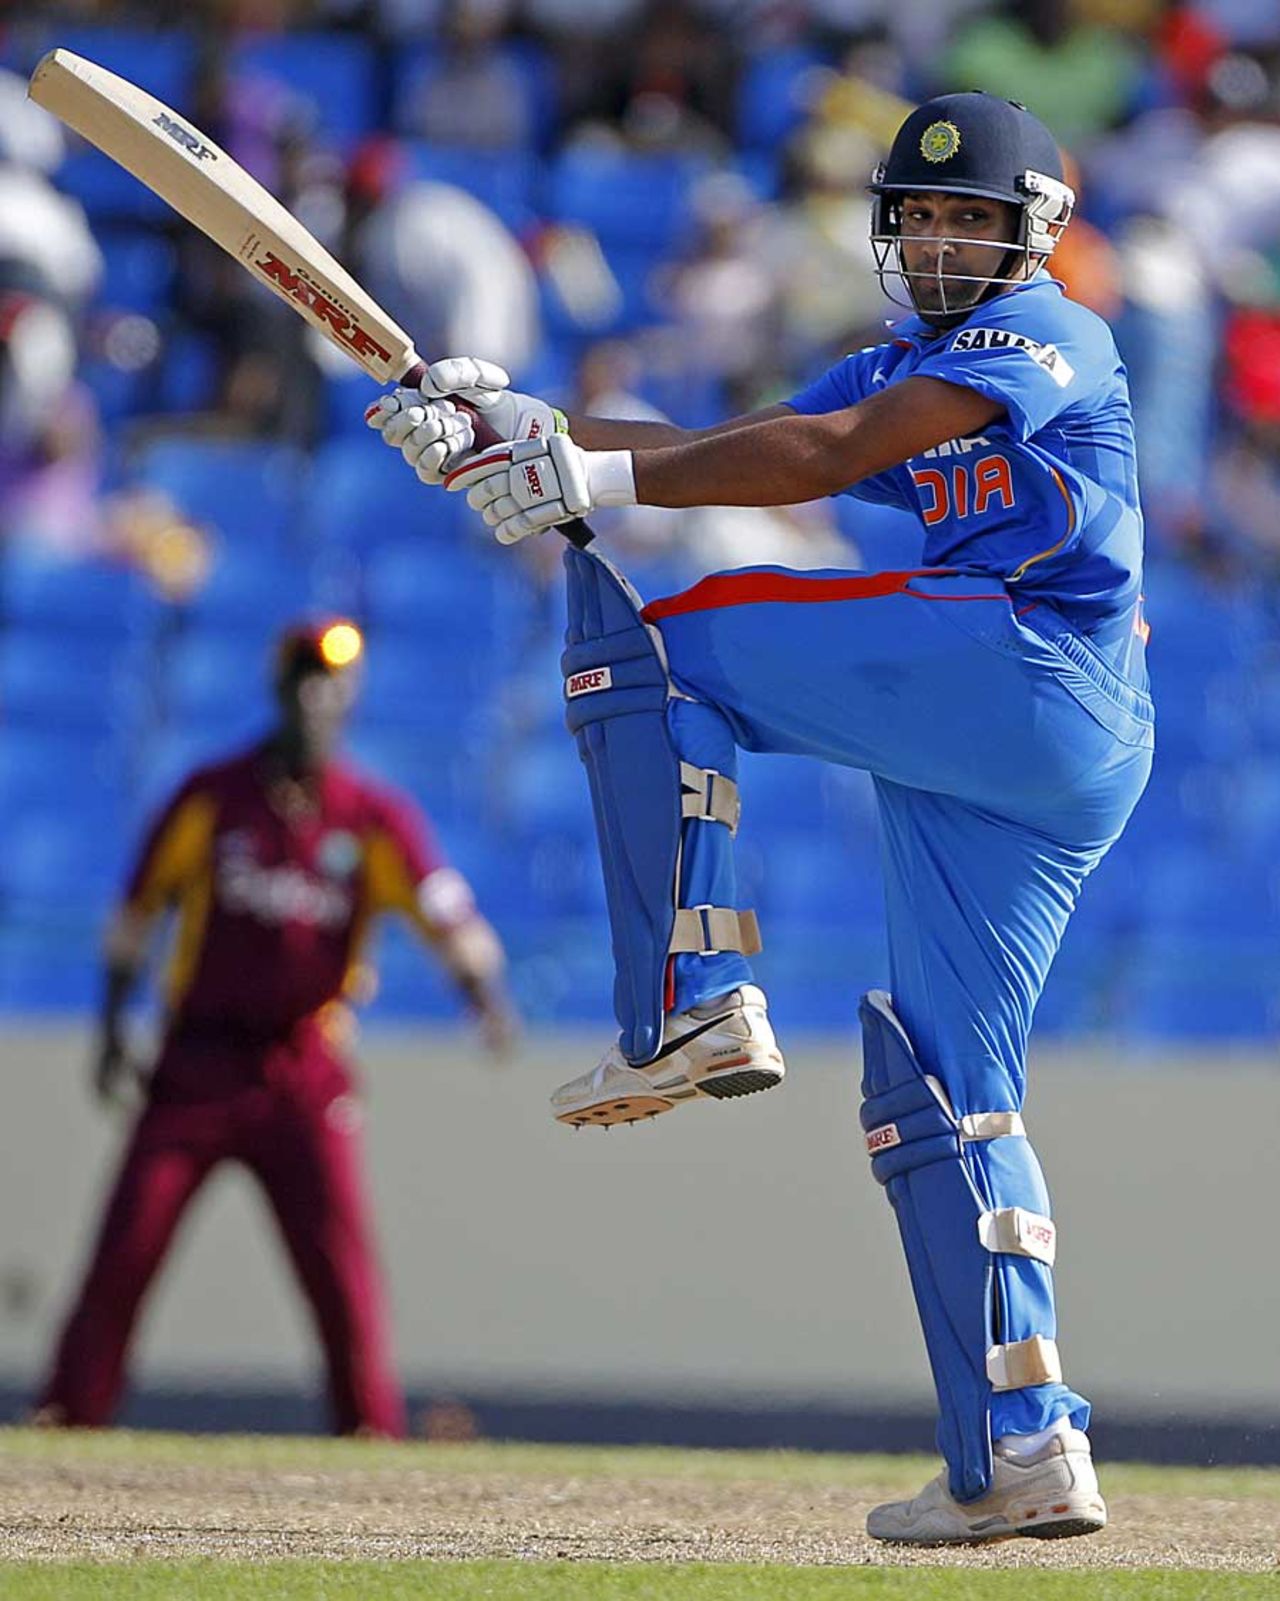 Rohit Sharma swivels to play one behind square, West Indies v India, 3rd ODI, Antigua, June 11, 2011